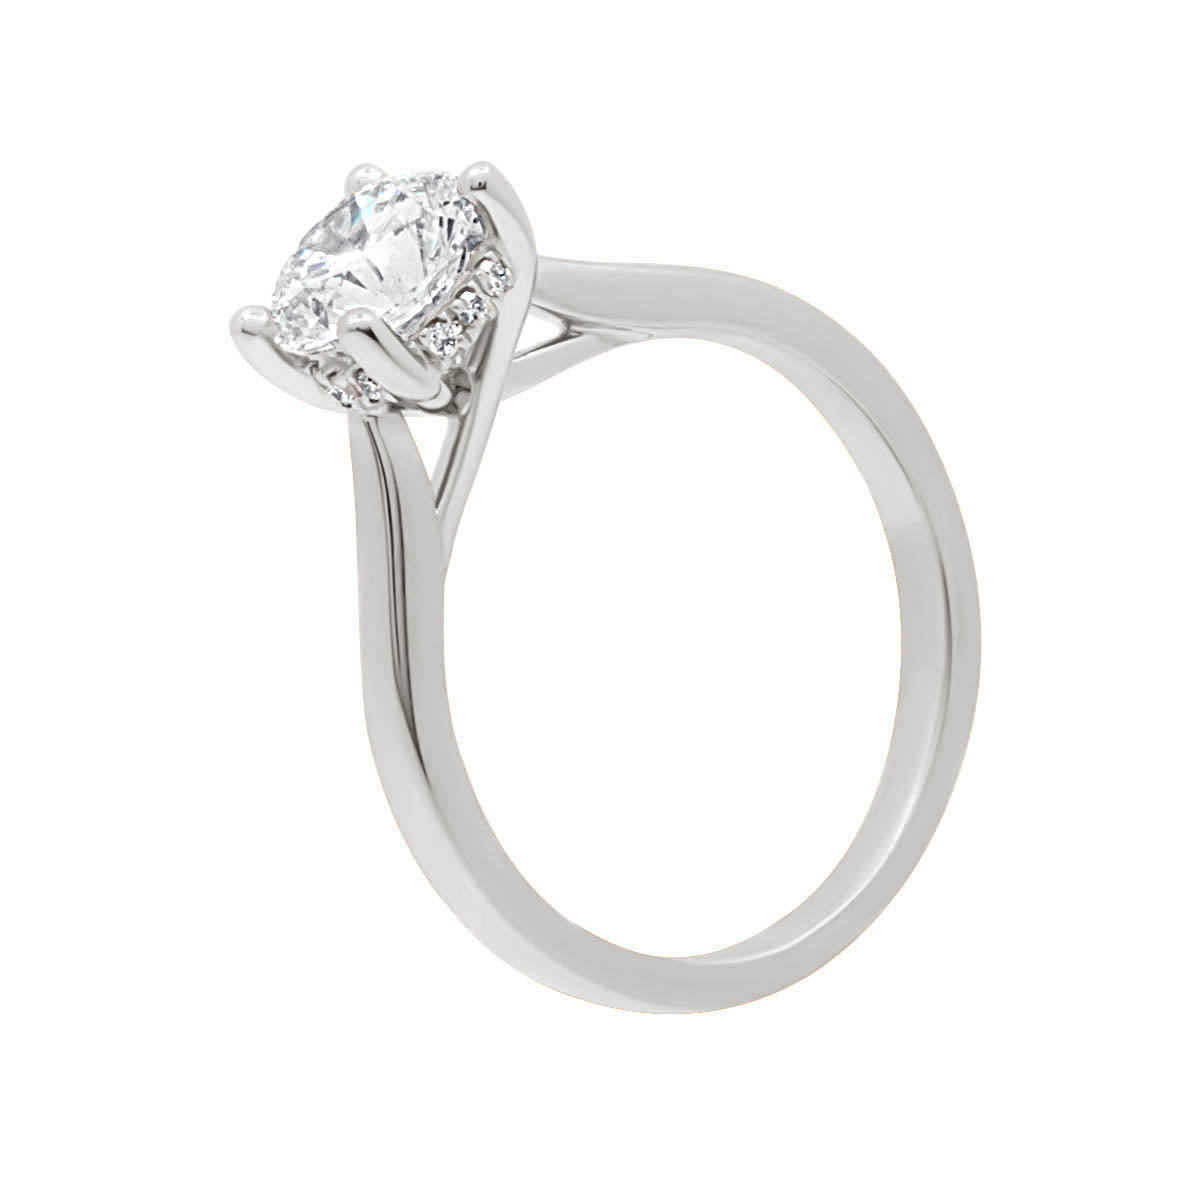 Hidden Halo Solitaire Engagement Ring in white gold in upright angled position